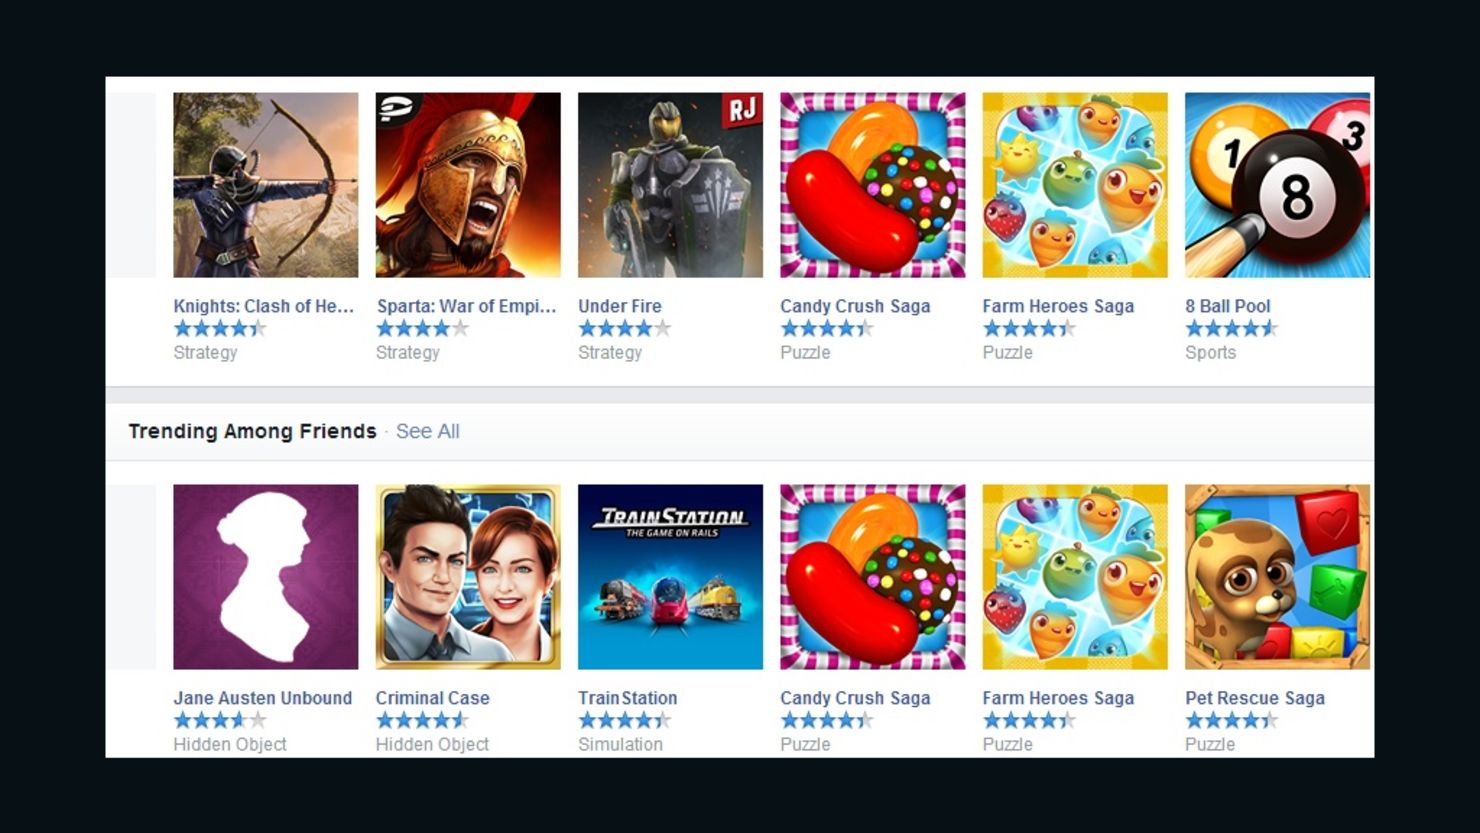 Games on Facebook will be required to reveal in-app purchases and quit bonuses for liking their pages under new rules.